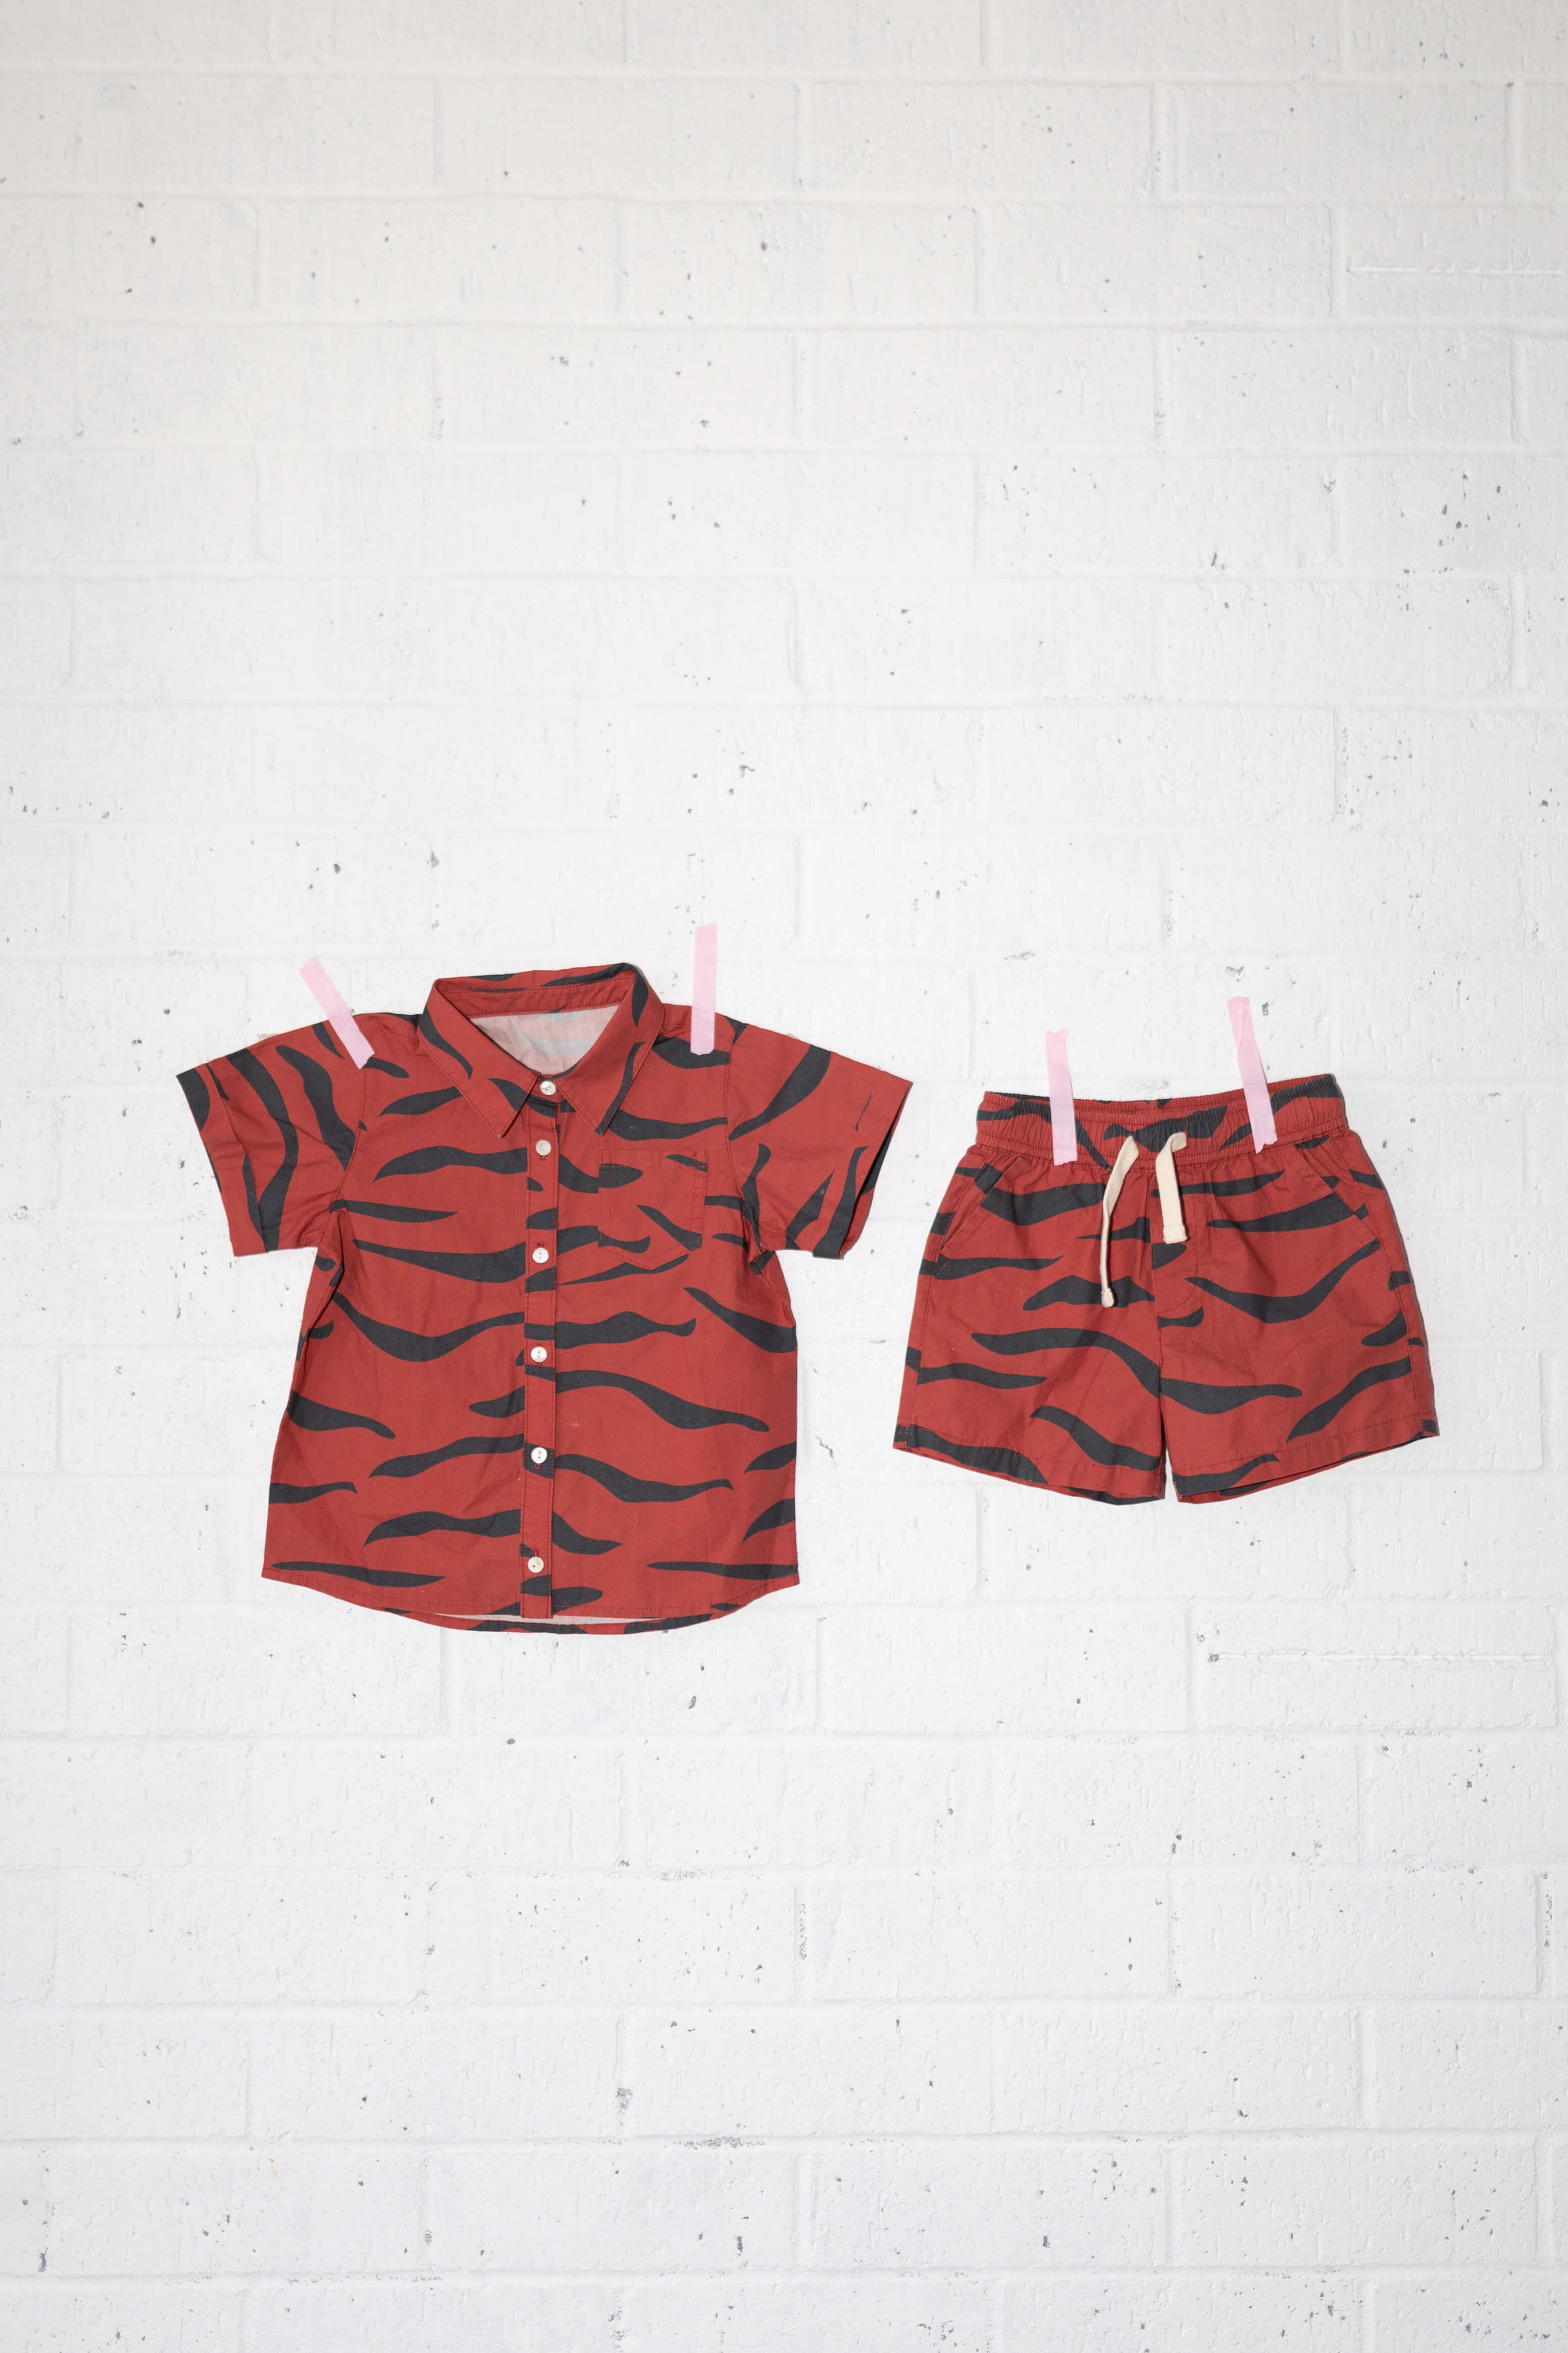 easy tiger rusty red shorts - Lil Groms Kids Co